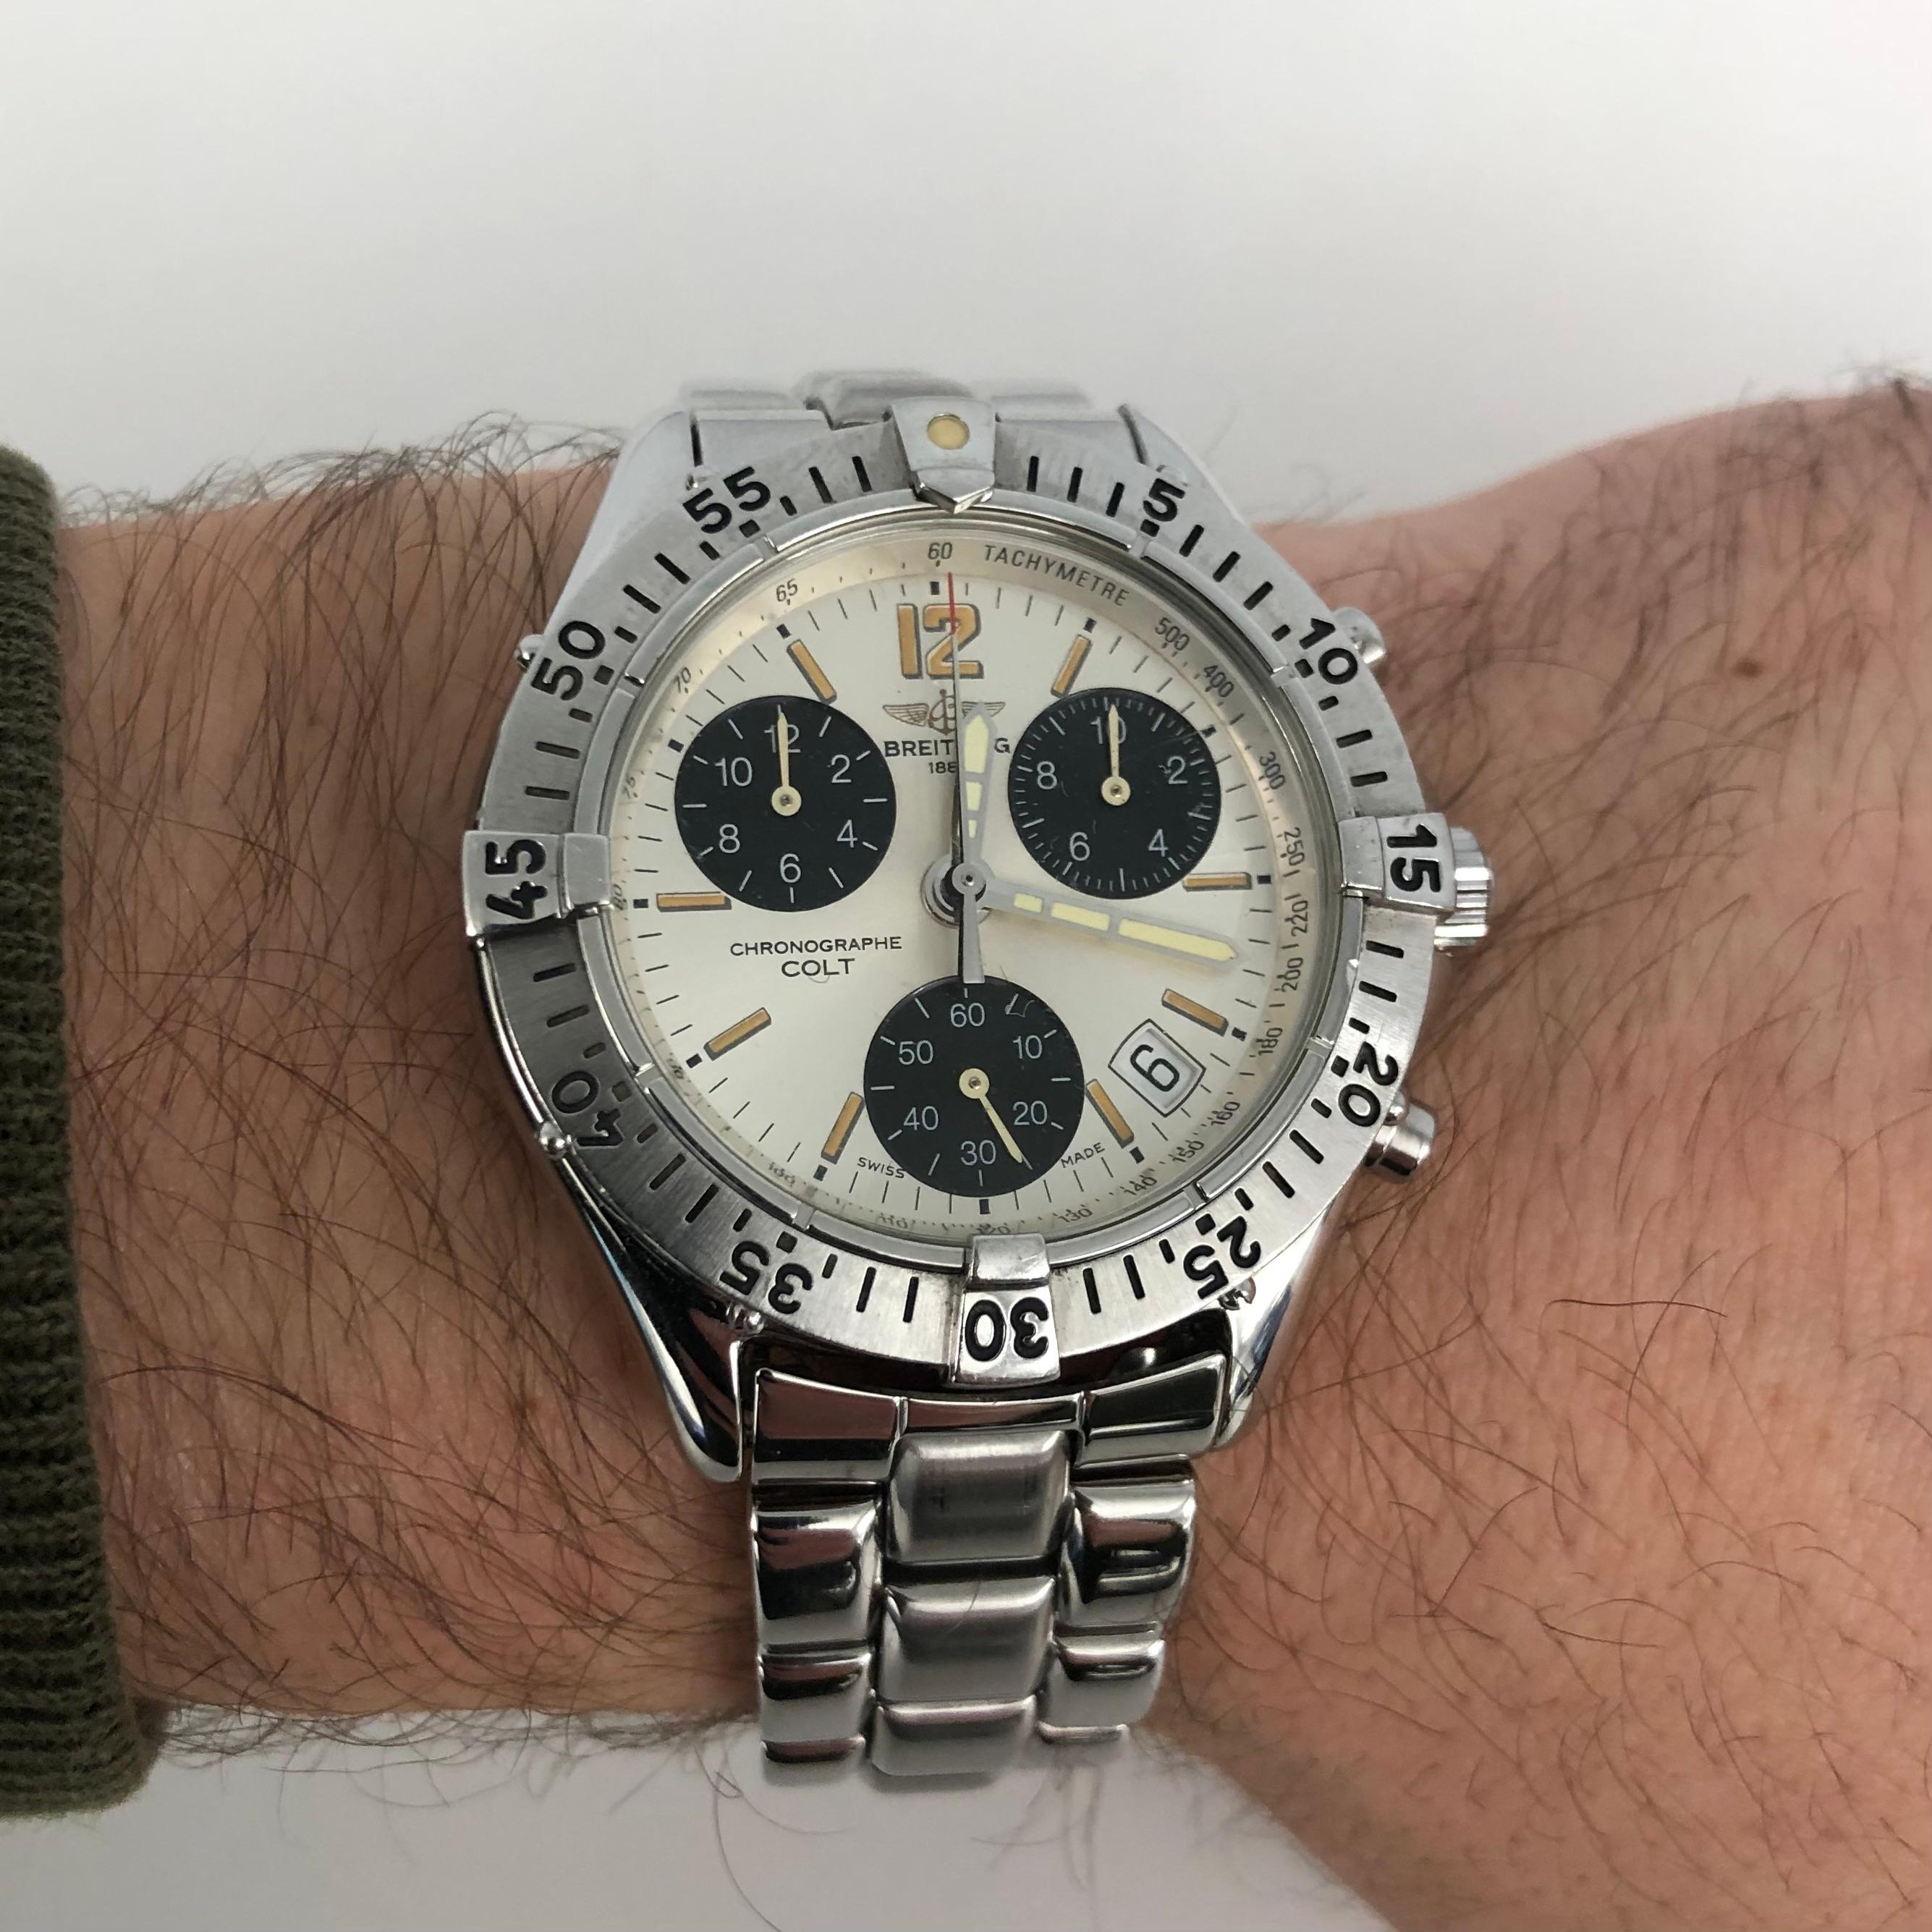 Breitling Men's Colt Chronograph Stainless Steel White Dial Watch A53035.

This 38mm Breitling Colt Chronograph timepiece features a stainless steel case with a unidirectional rotating bezel and a stainless steel bracelet with folding deployment